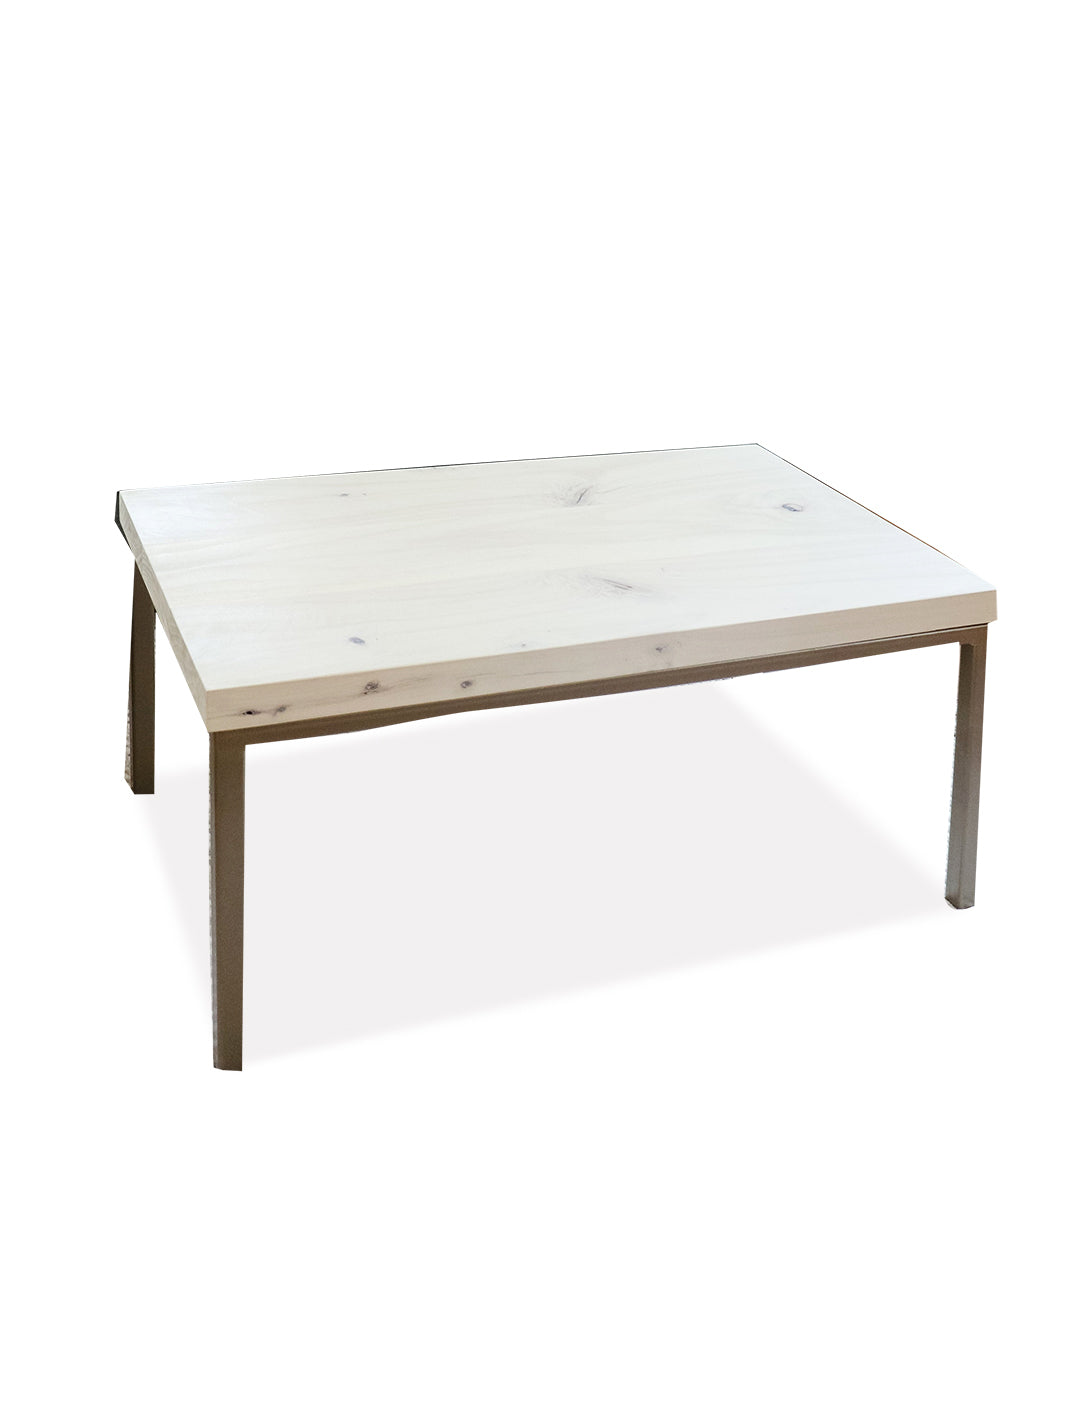 Modern White Maple Coffee Table with Gold Metal Base SHOWROOM (in stock) Earthly Comfort Coffee Tables 2042-1